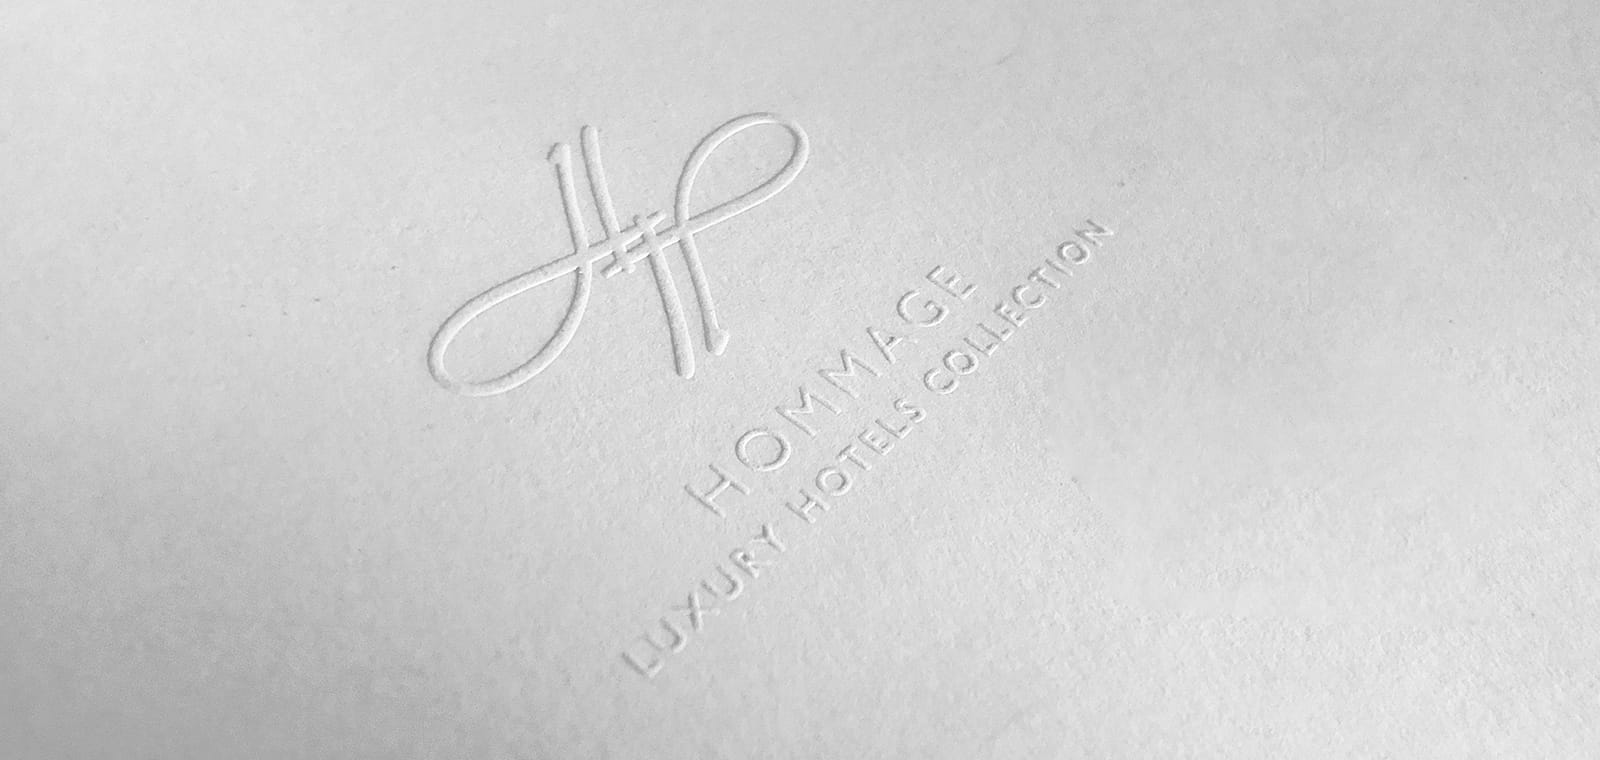 The Homage Hotels logo printed on a white background